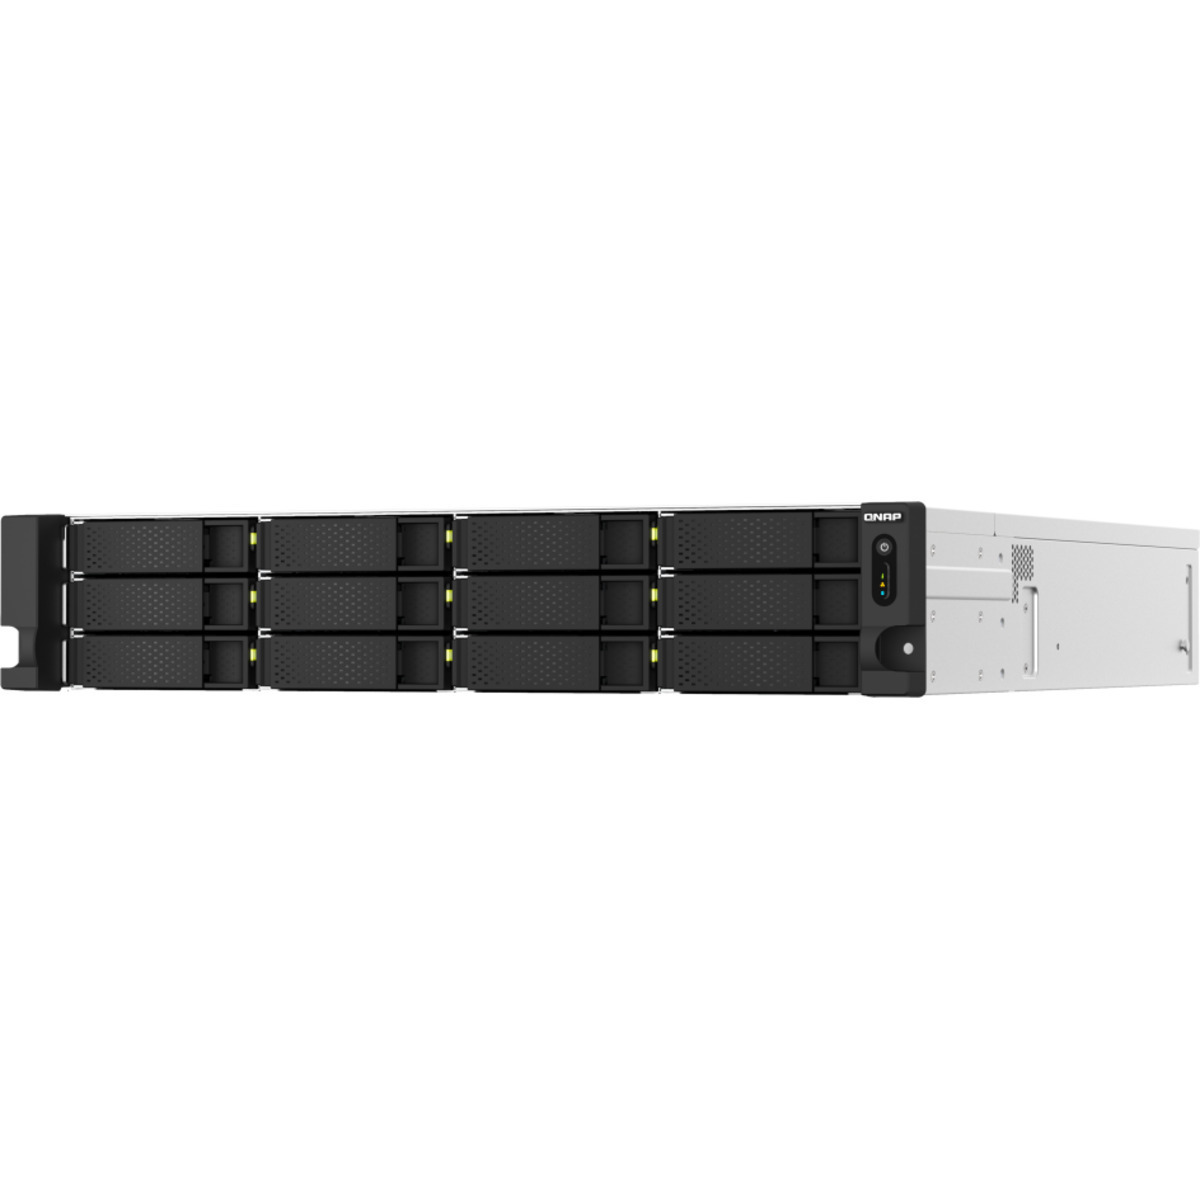 QNAP TS-h1887XU-RP E-2336 QuTS hero Edition RackMount 12+6-Bay Large Business / Enterprise NAS - Network Attached Storage Device Burn-In Tested Configurations TS-h1887XU-RP E-2336 QuTS hero Edition